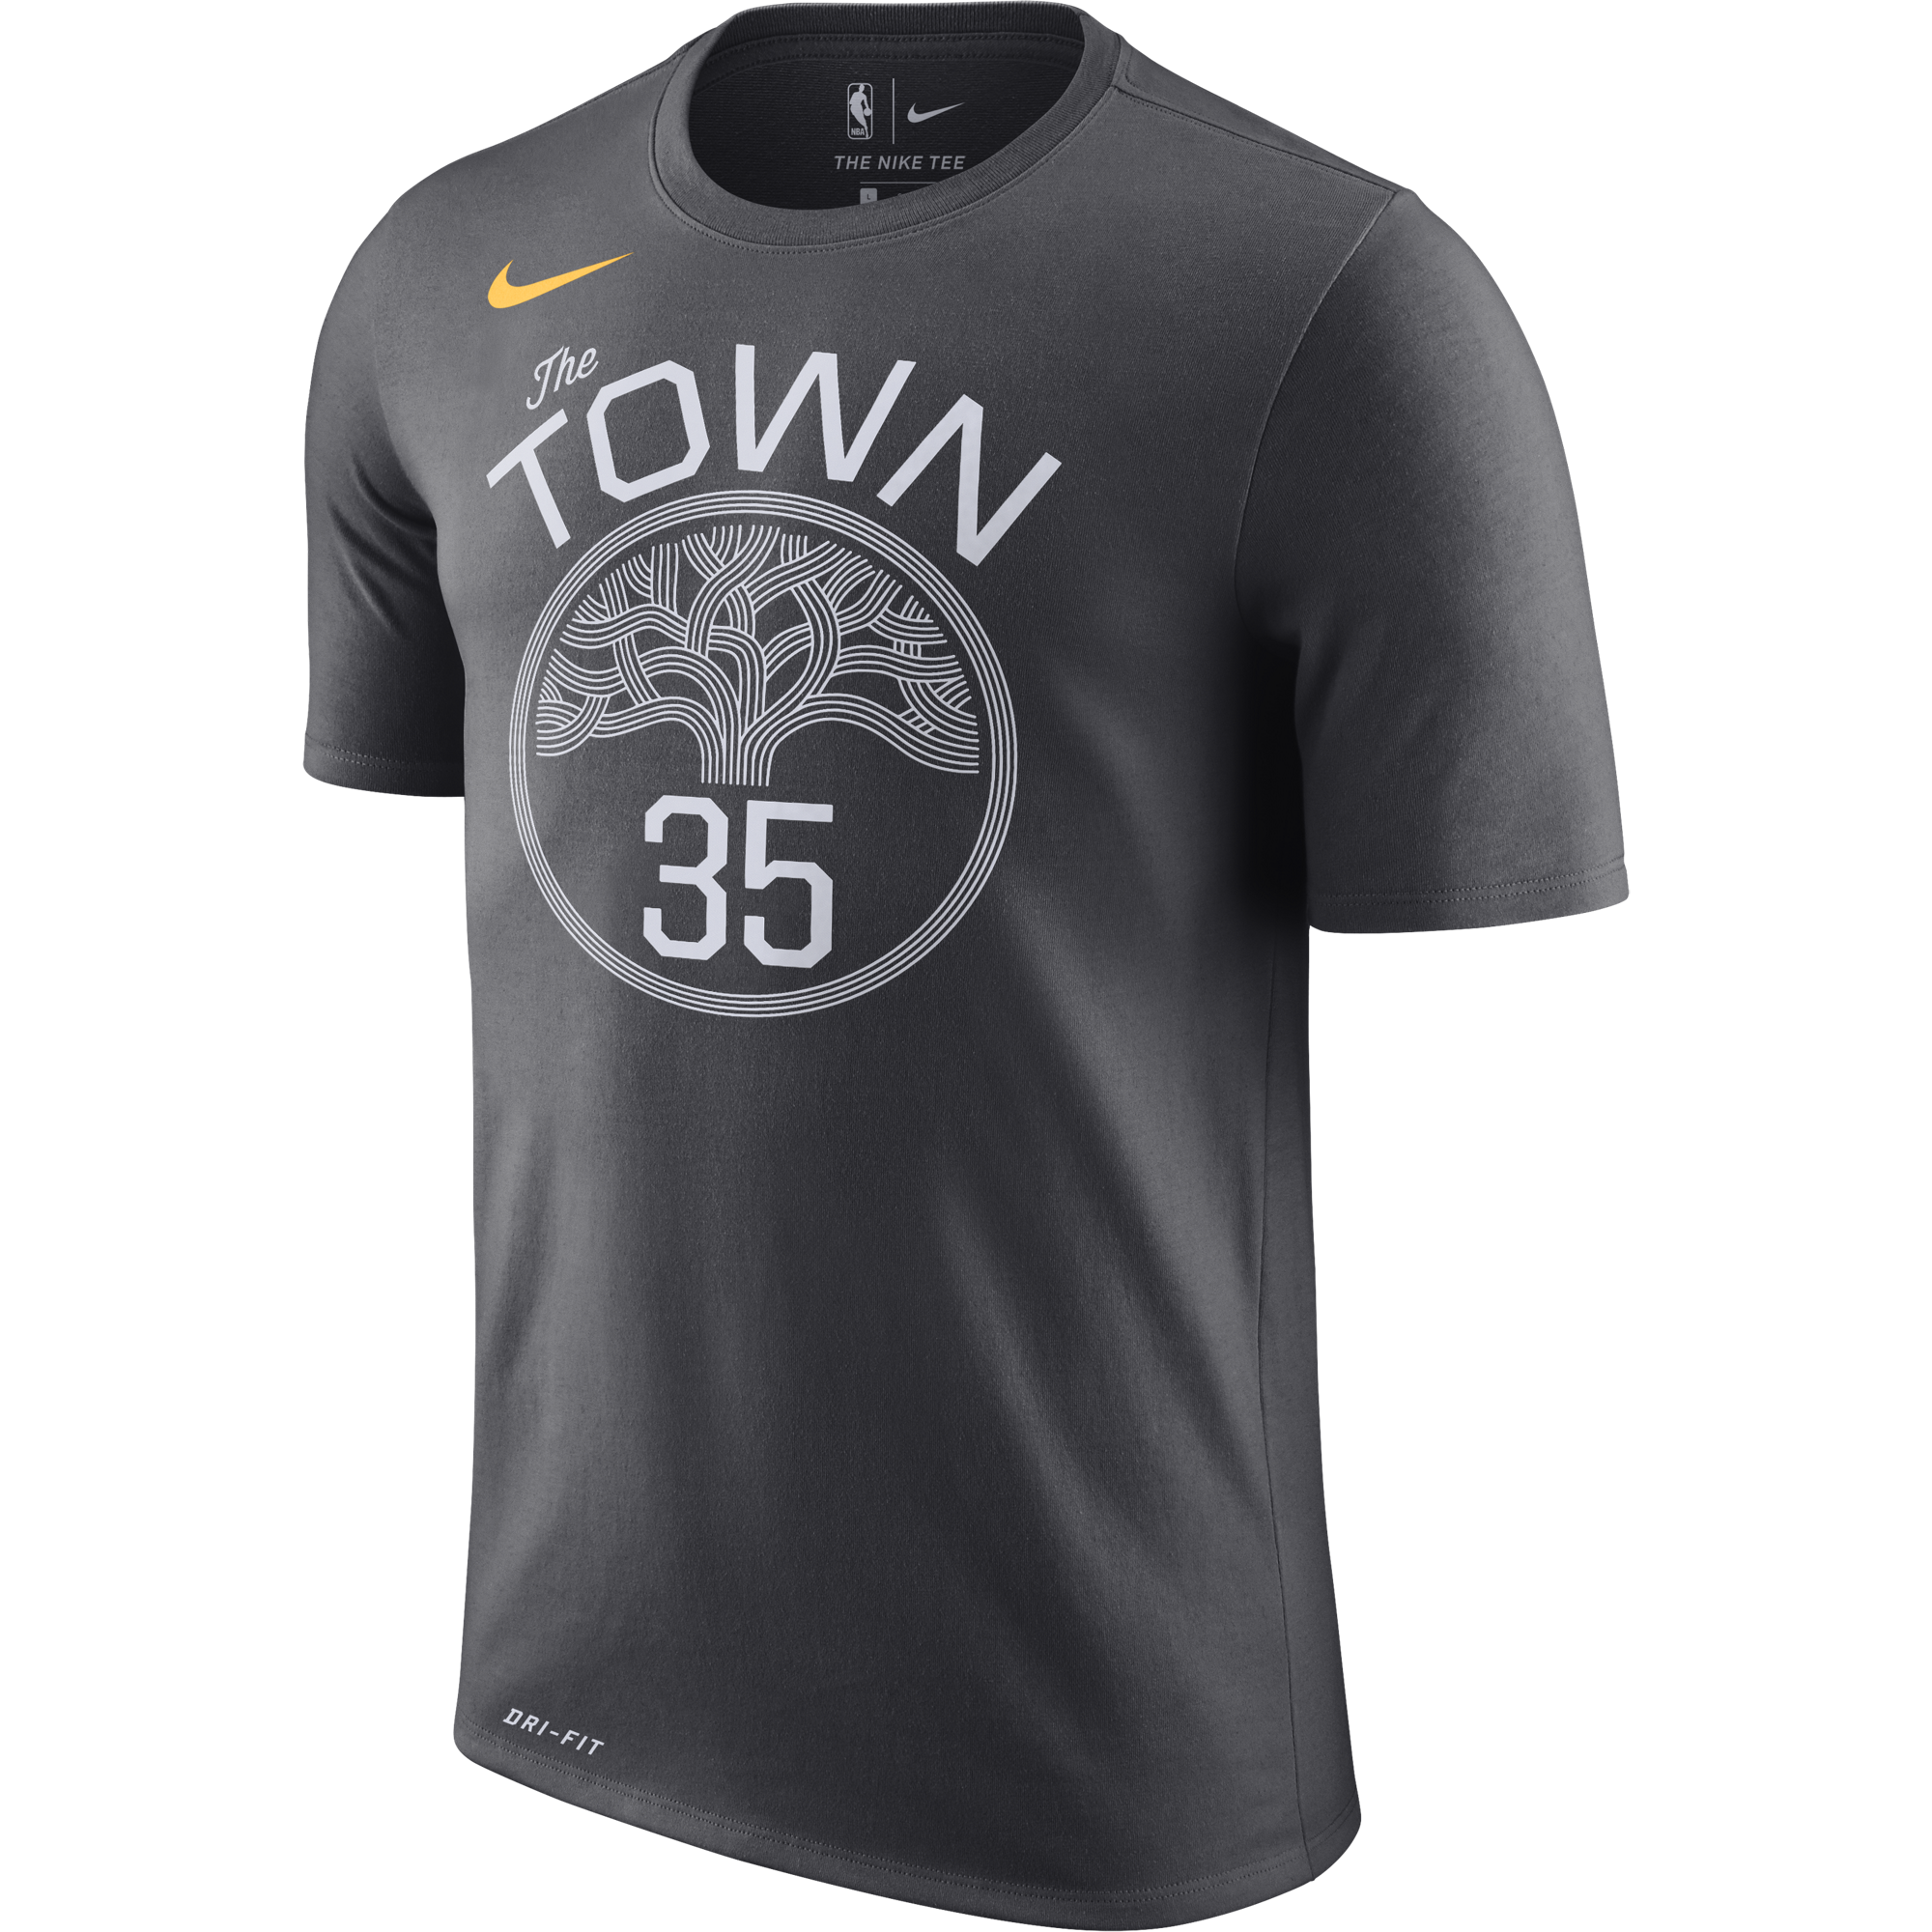 NIKE NBA GOLDEN STATE WARRIORS KEVIN DURANT DRY TEE BLACK